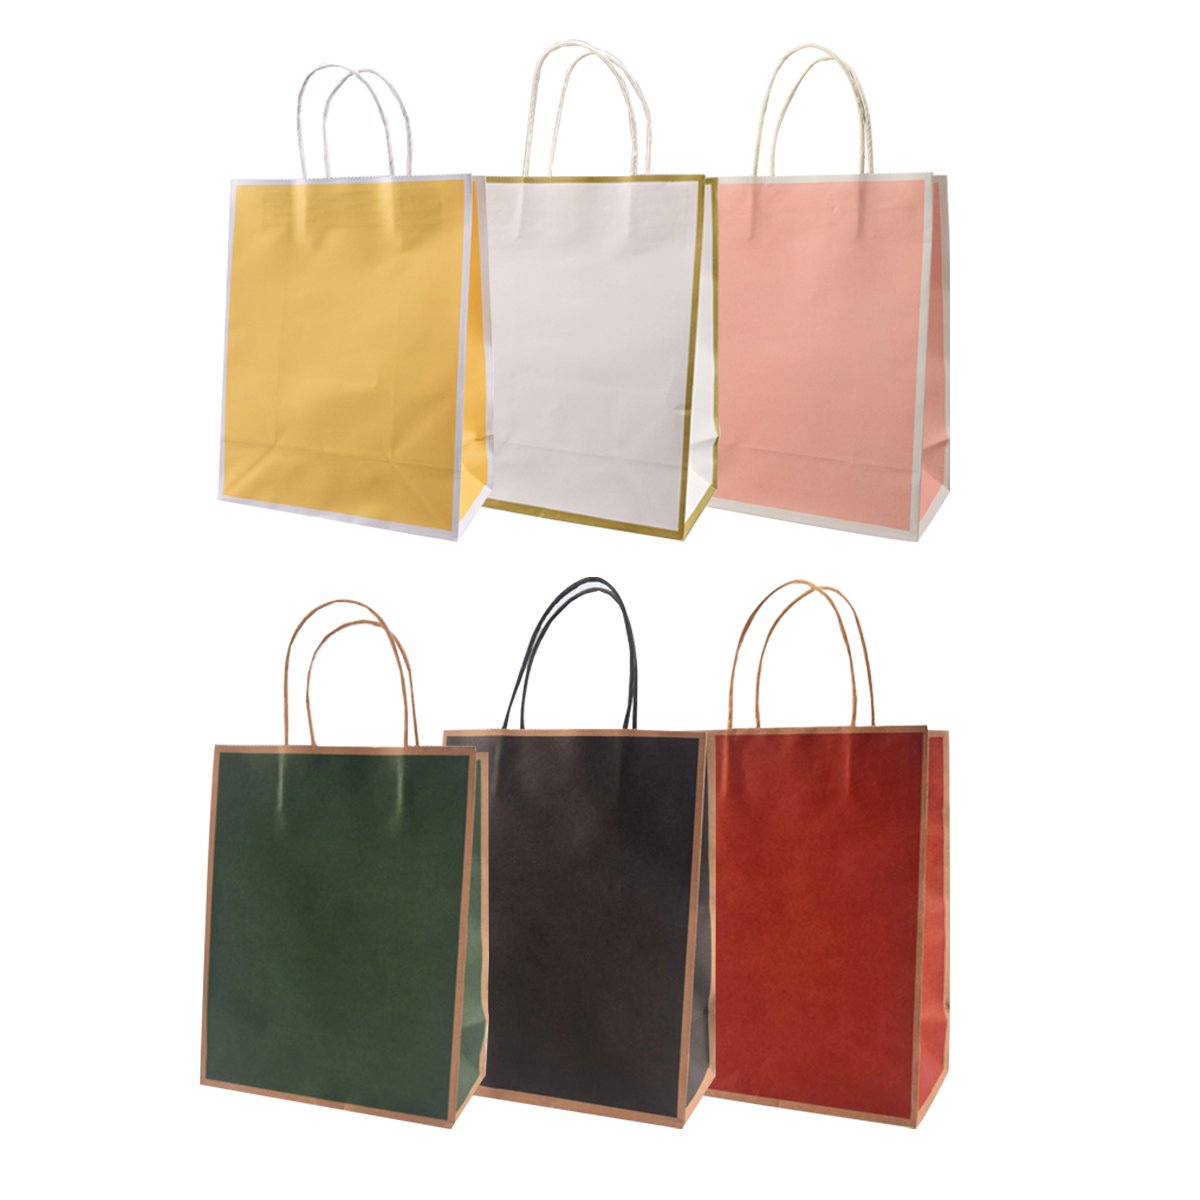 Vibrant Kraft Paper Bags for Stylish and Eco-Friendly Packaging